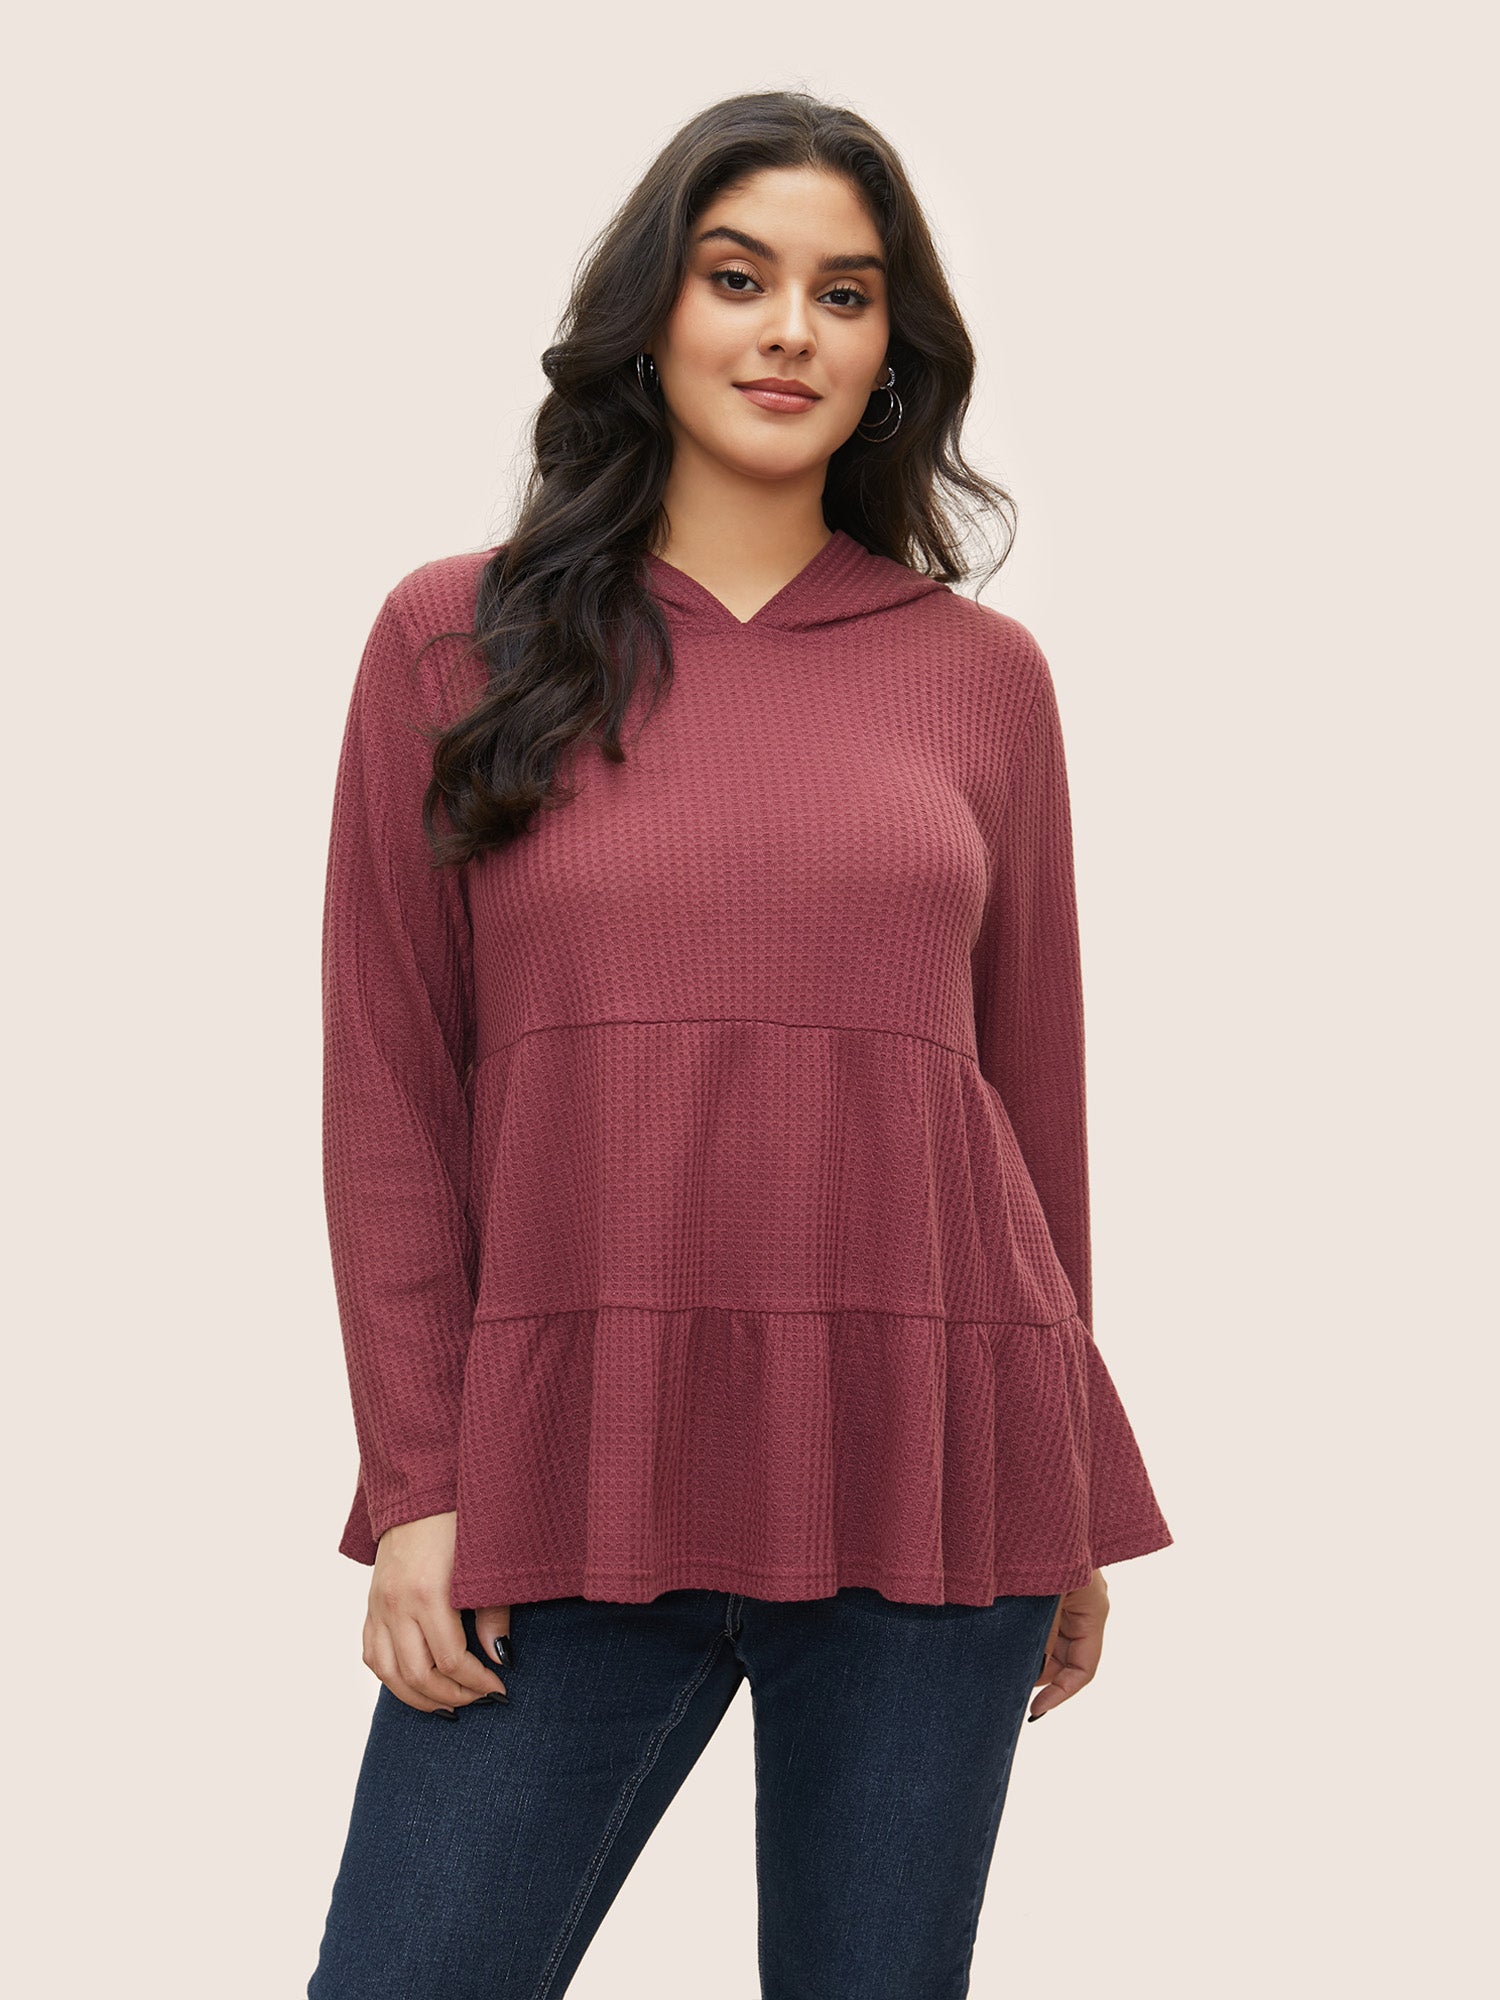 

Plus Size Women Everyday Plain Waffle Knit Regular Sleeve Long Sleeve Hooded Casual T-shirts BloomChic, Dusty pink